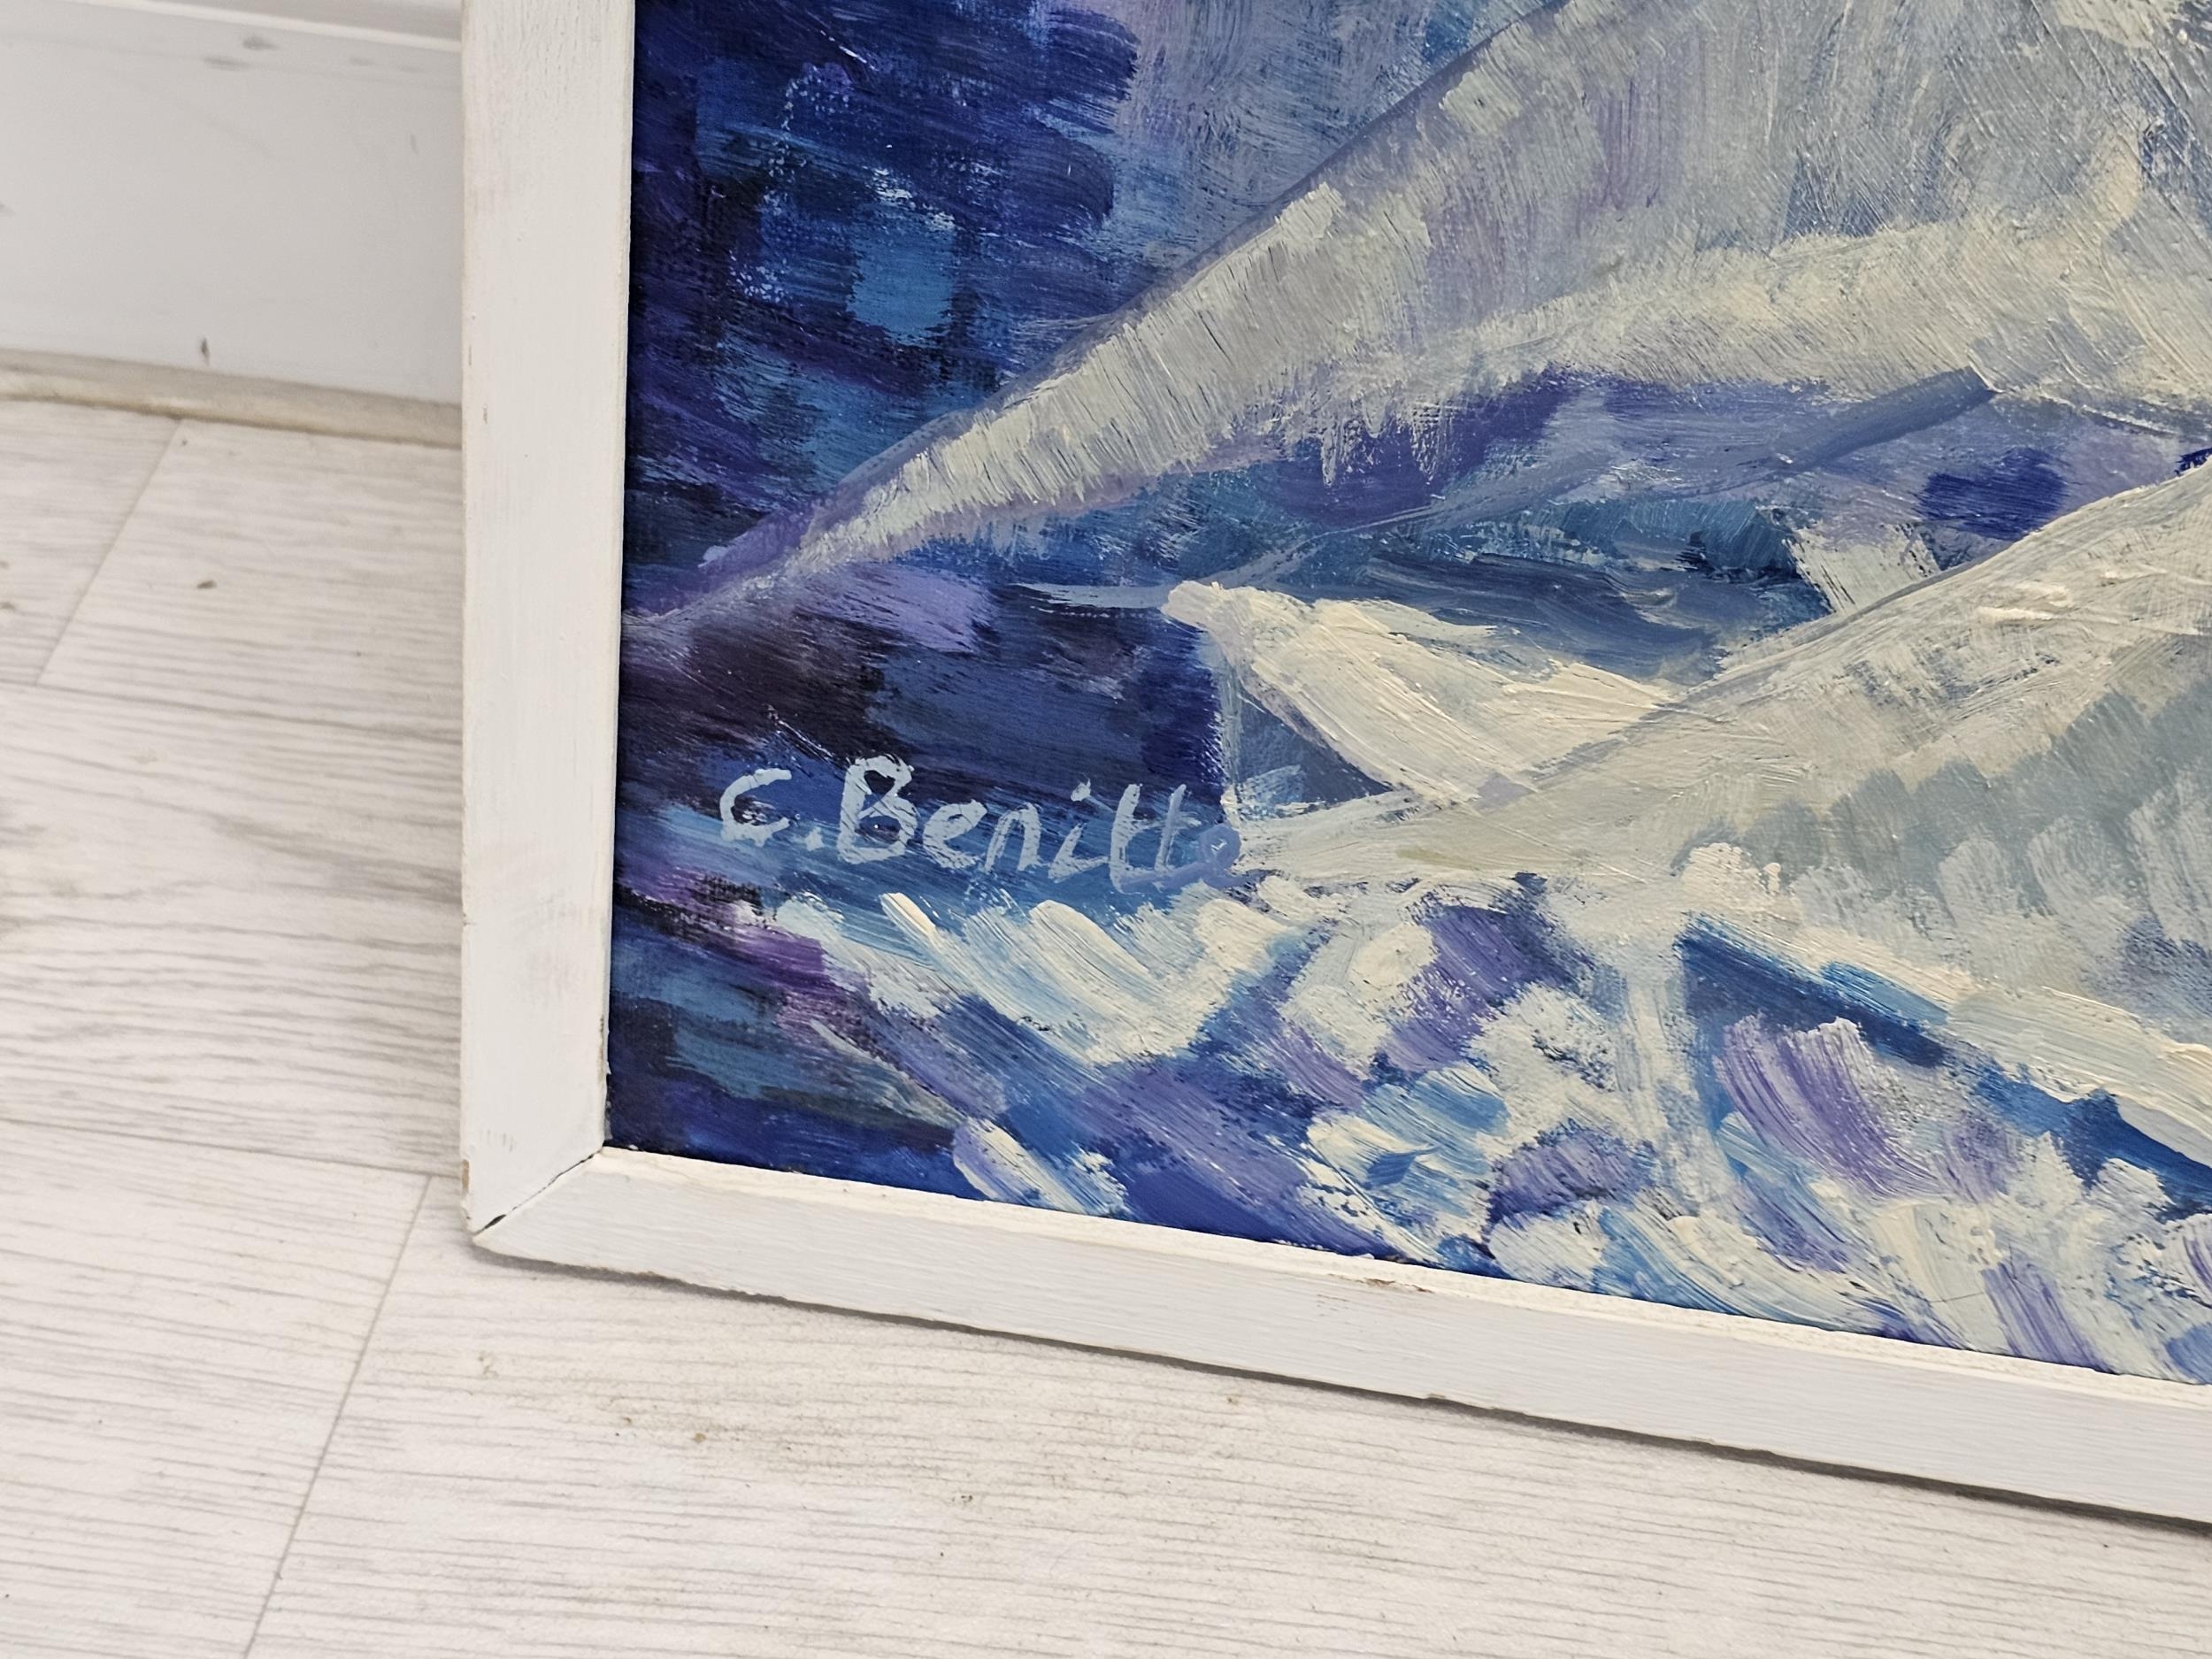 Celeste Benitte (French). Oil on canvas. An large abstract seascape with a yacht and seagulls. - Image 3 of 5